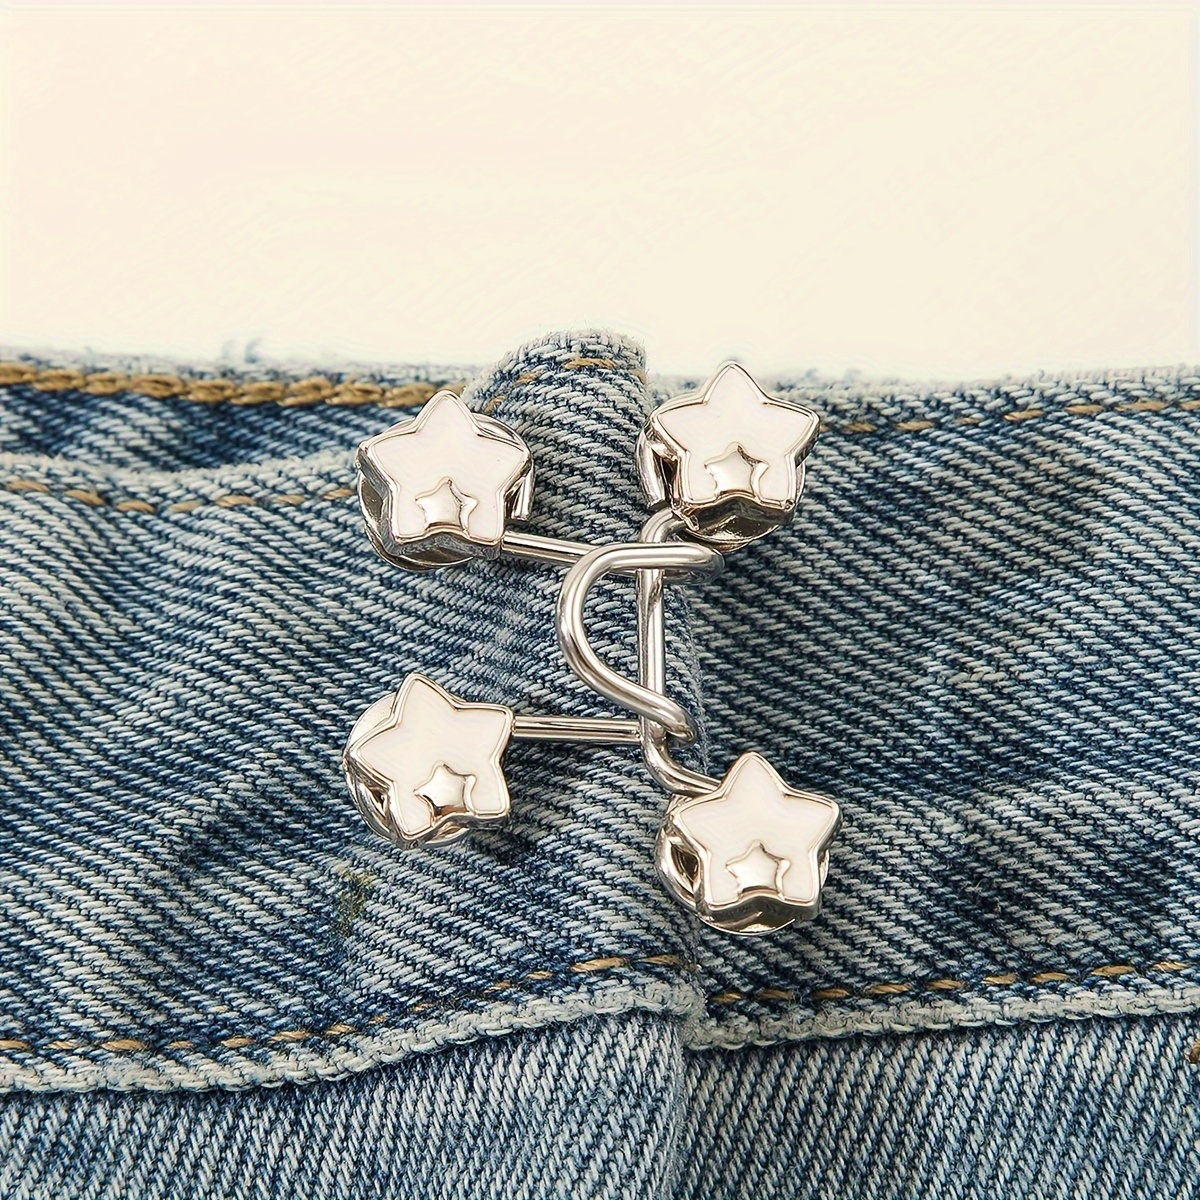 1pc Waist Tightener Adjustable Waist Buckle For Jeans, No Sewing Required  Bowknot Button Adjuster For Pants And Skirts